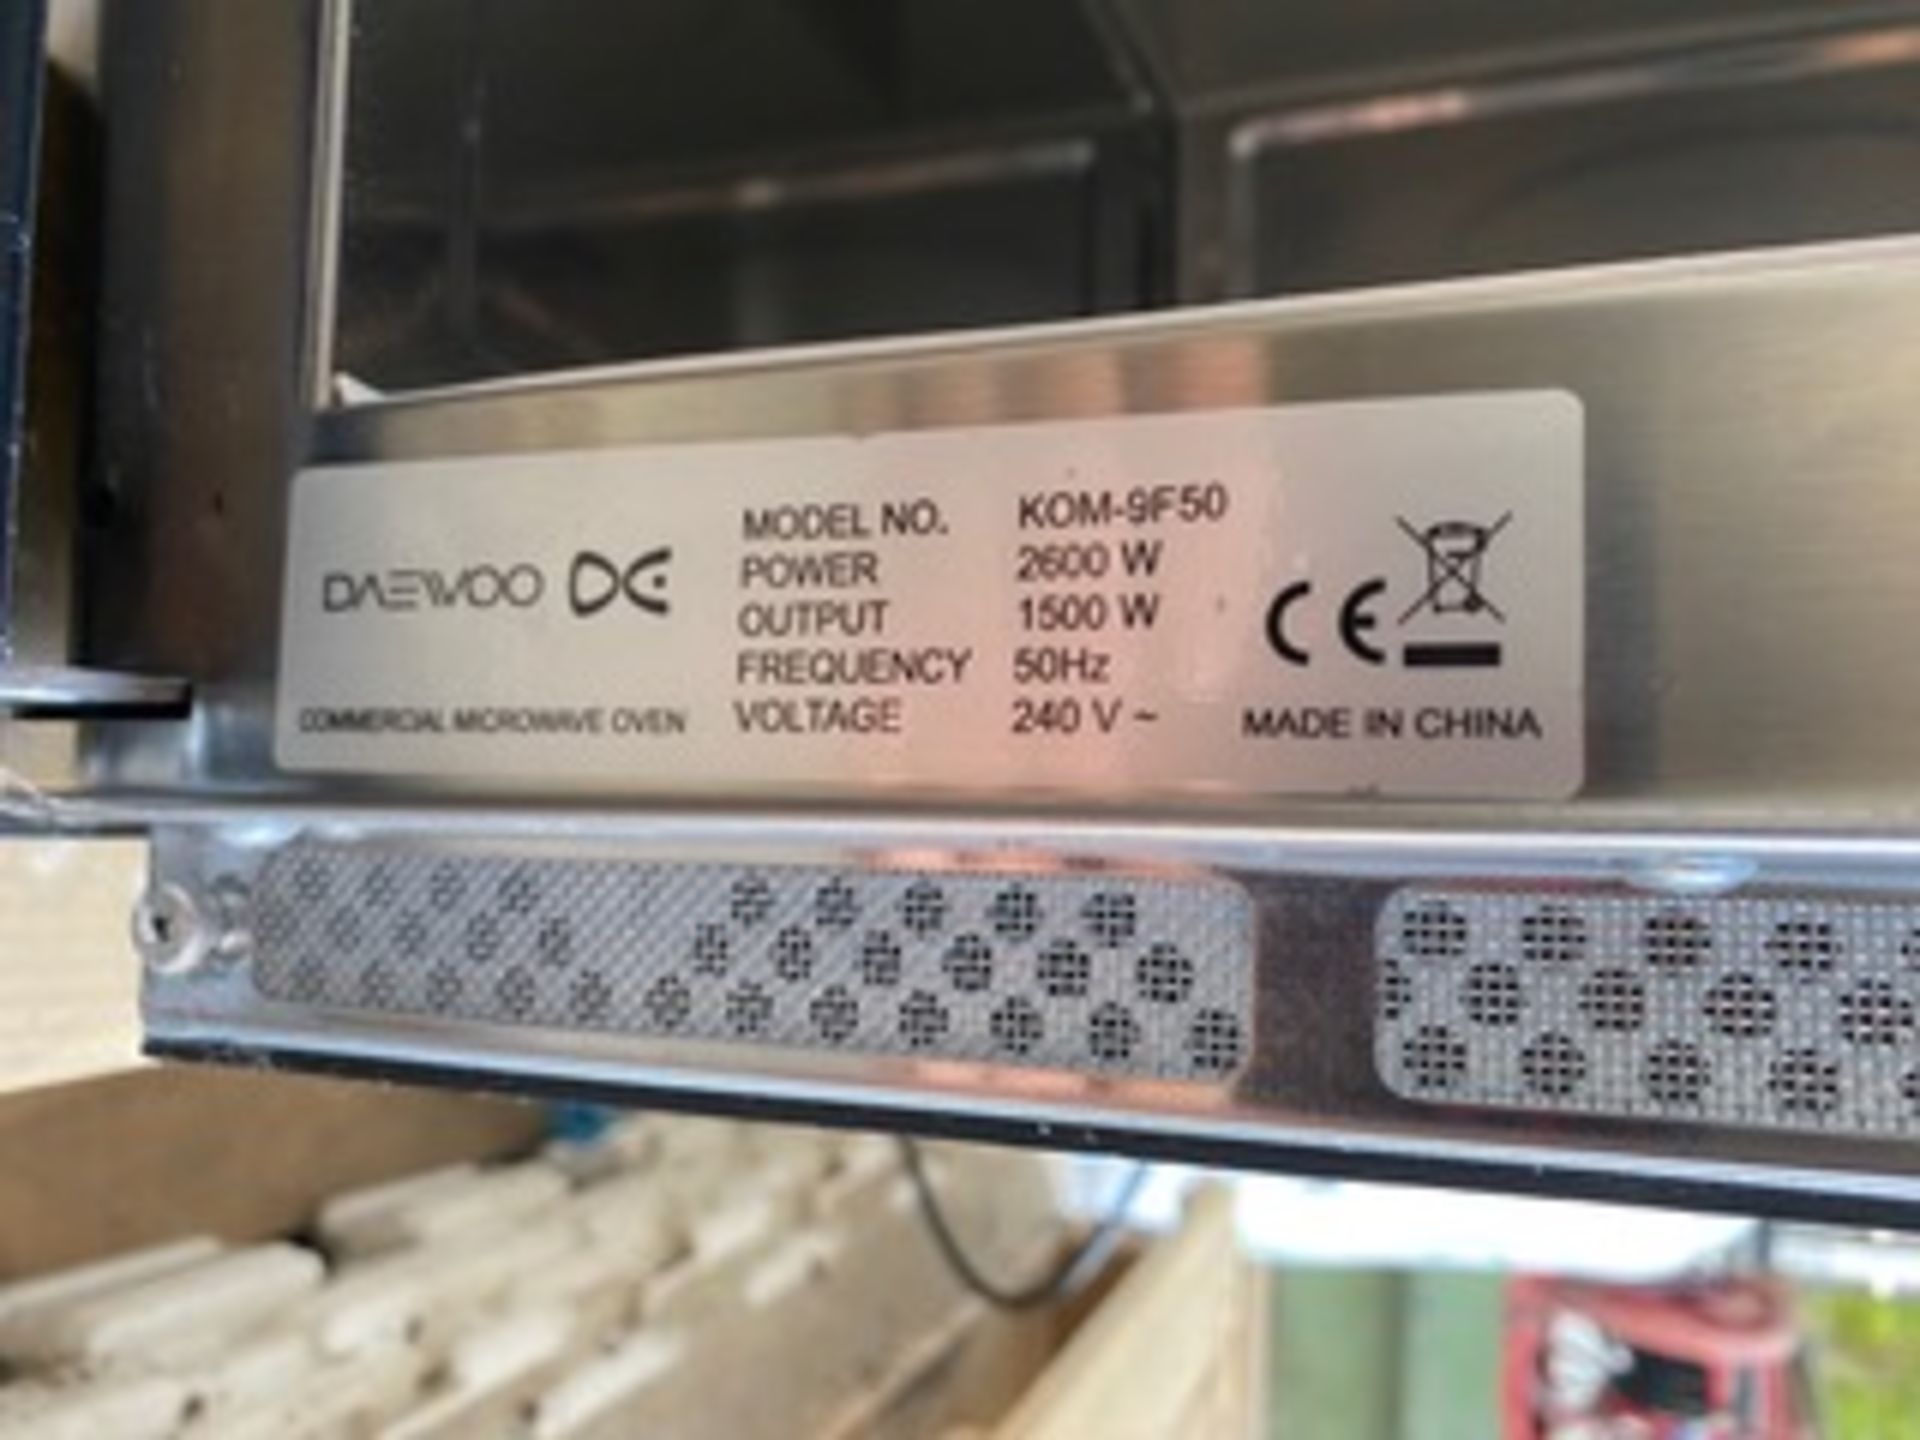 Commercial Microwave made by Daewoo - Image 6 of 6